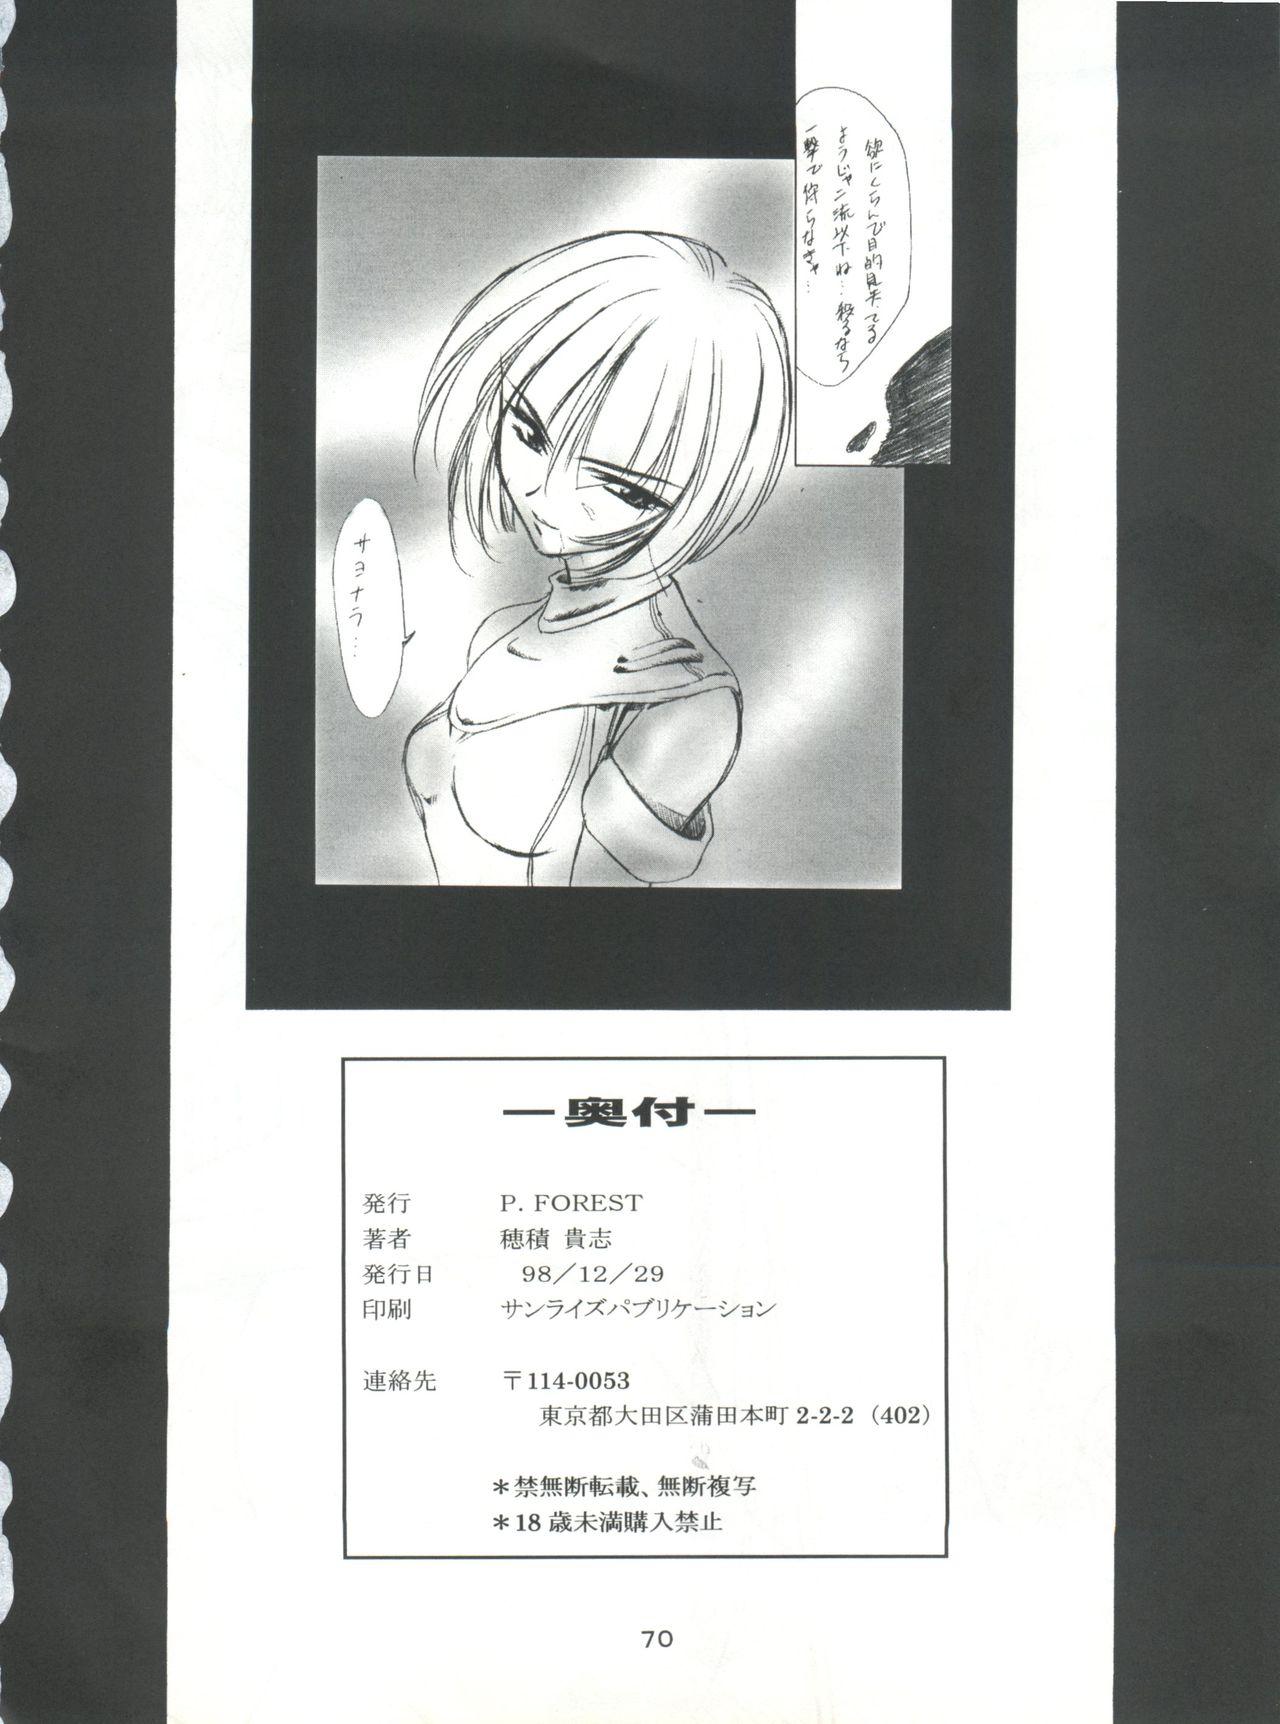 Jerkoff Boys and Girls - White album Kare kano Ameture Porn - Page 70